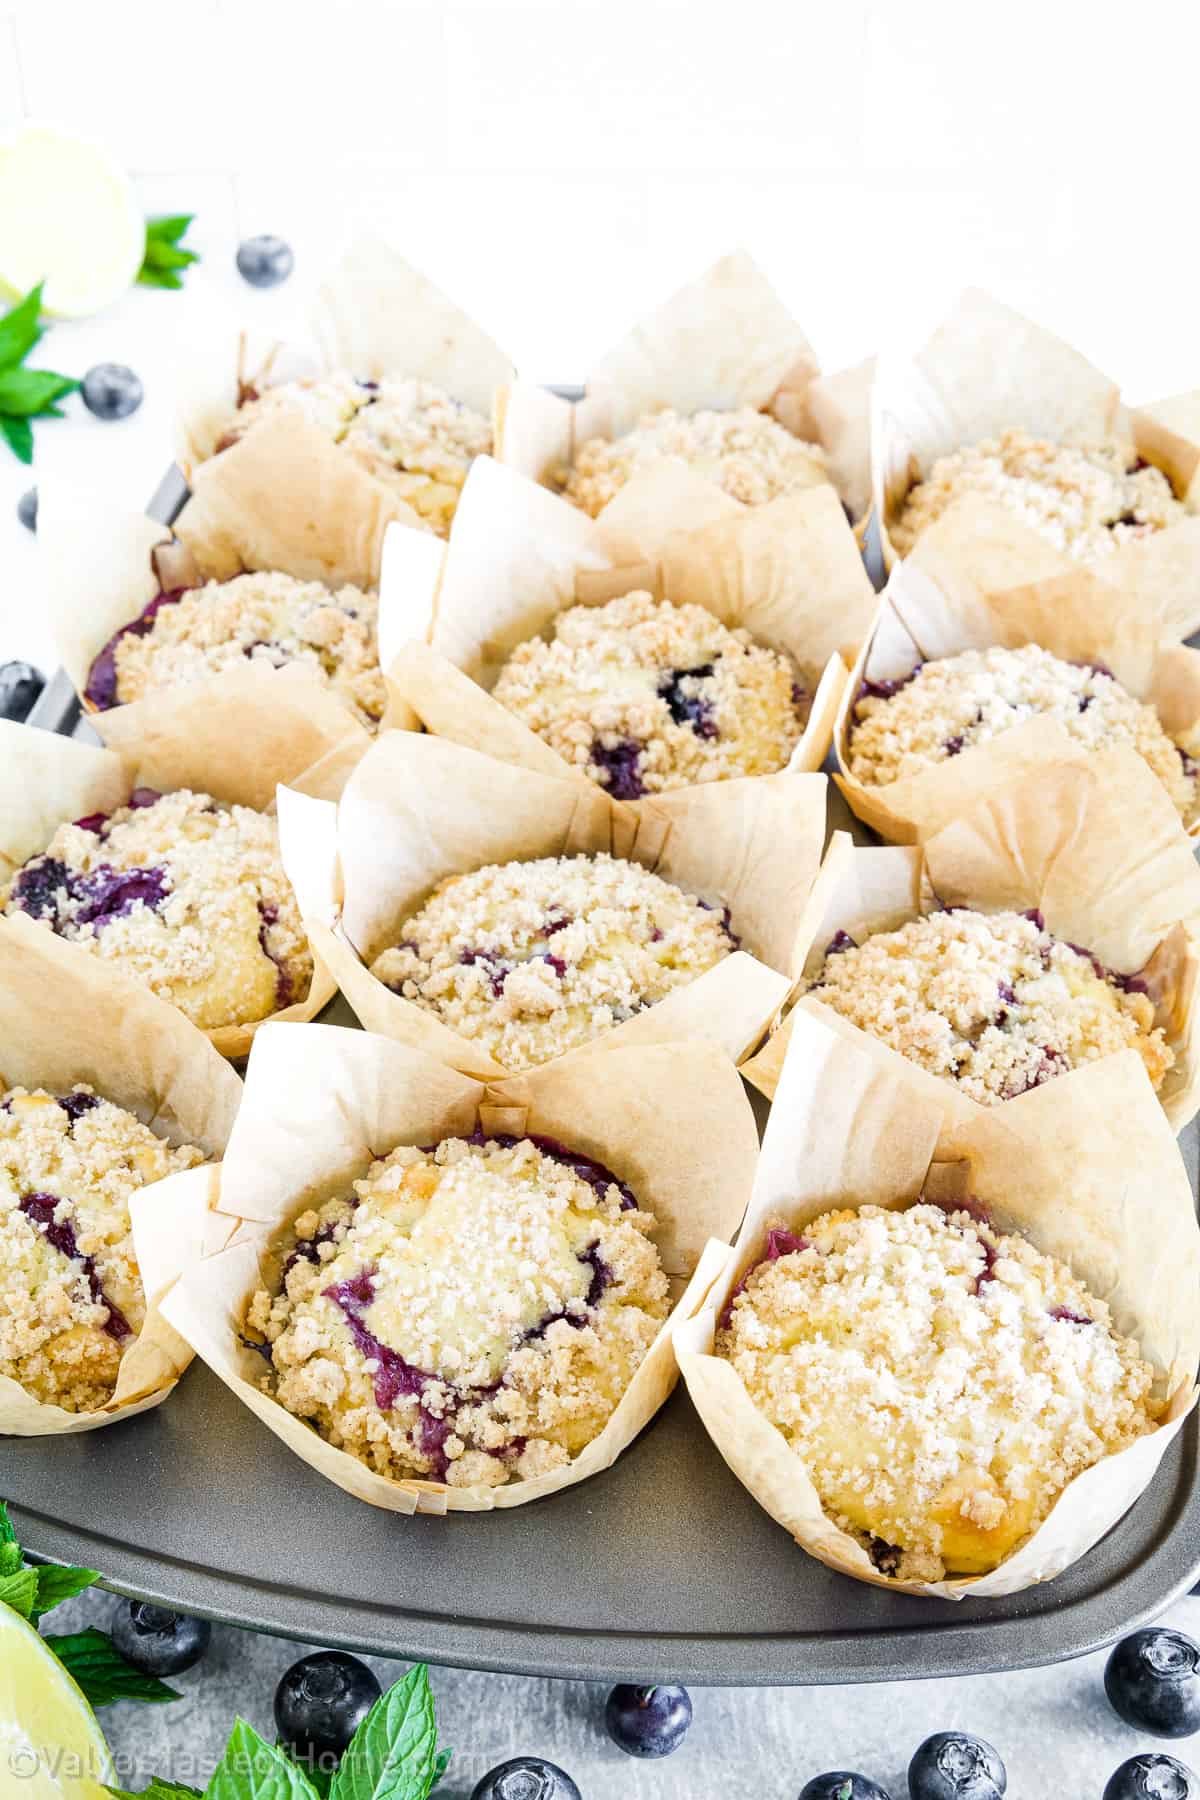 Blueberry muffins are a classic breakfast treat that can brighten up any morning.